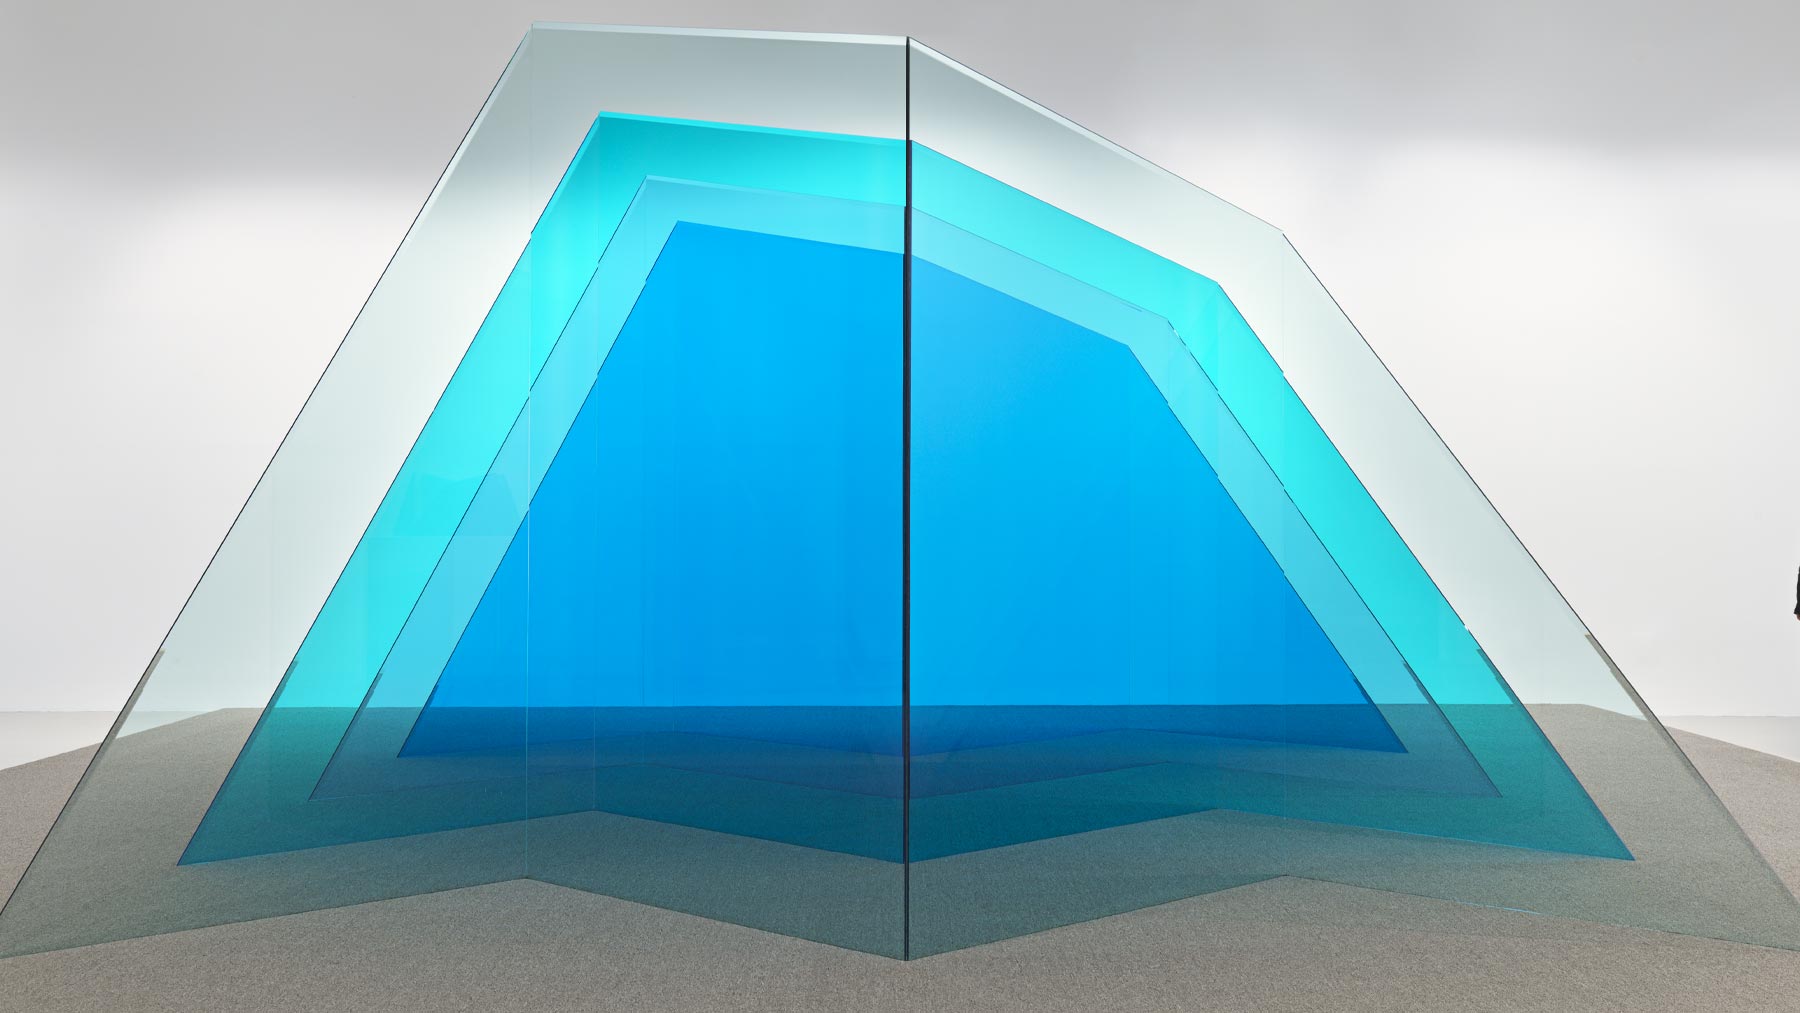 Installation image of Iceberg by Larry Bell